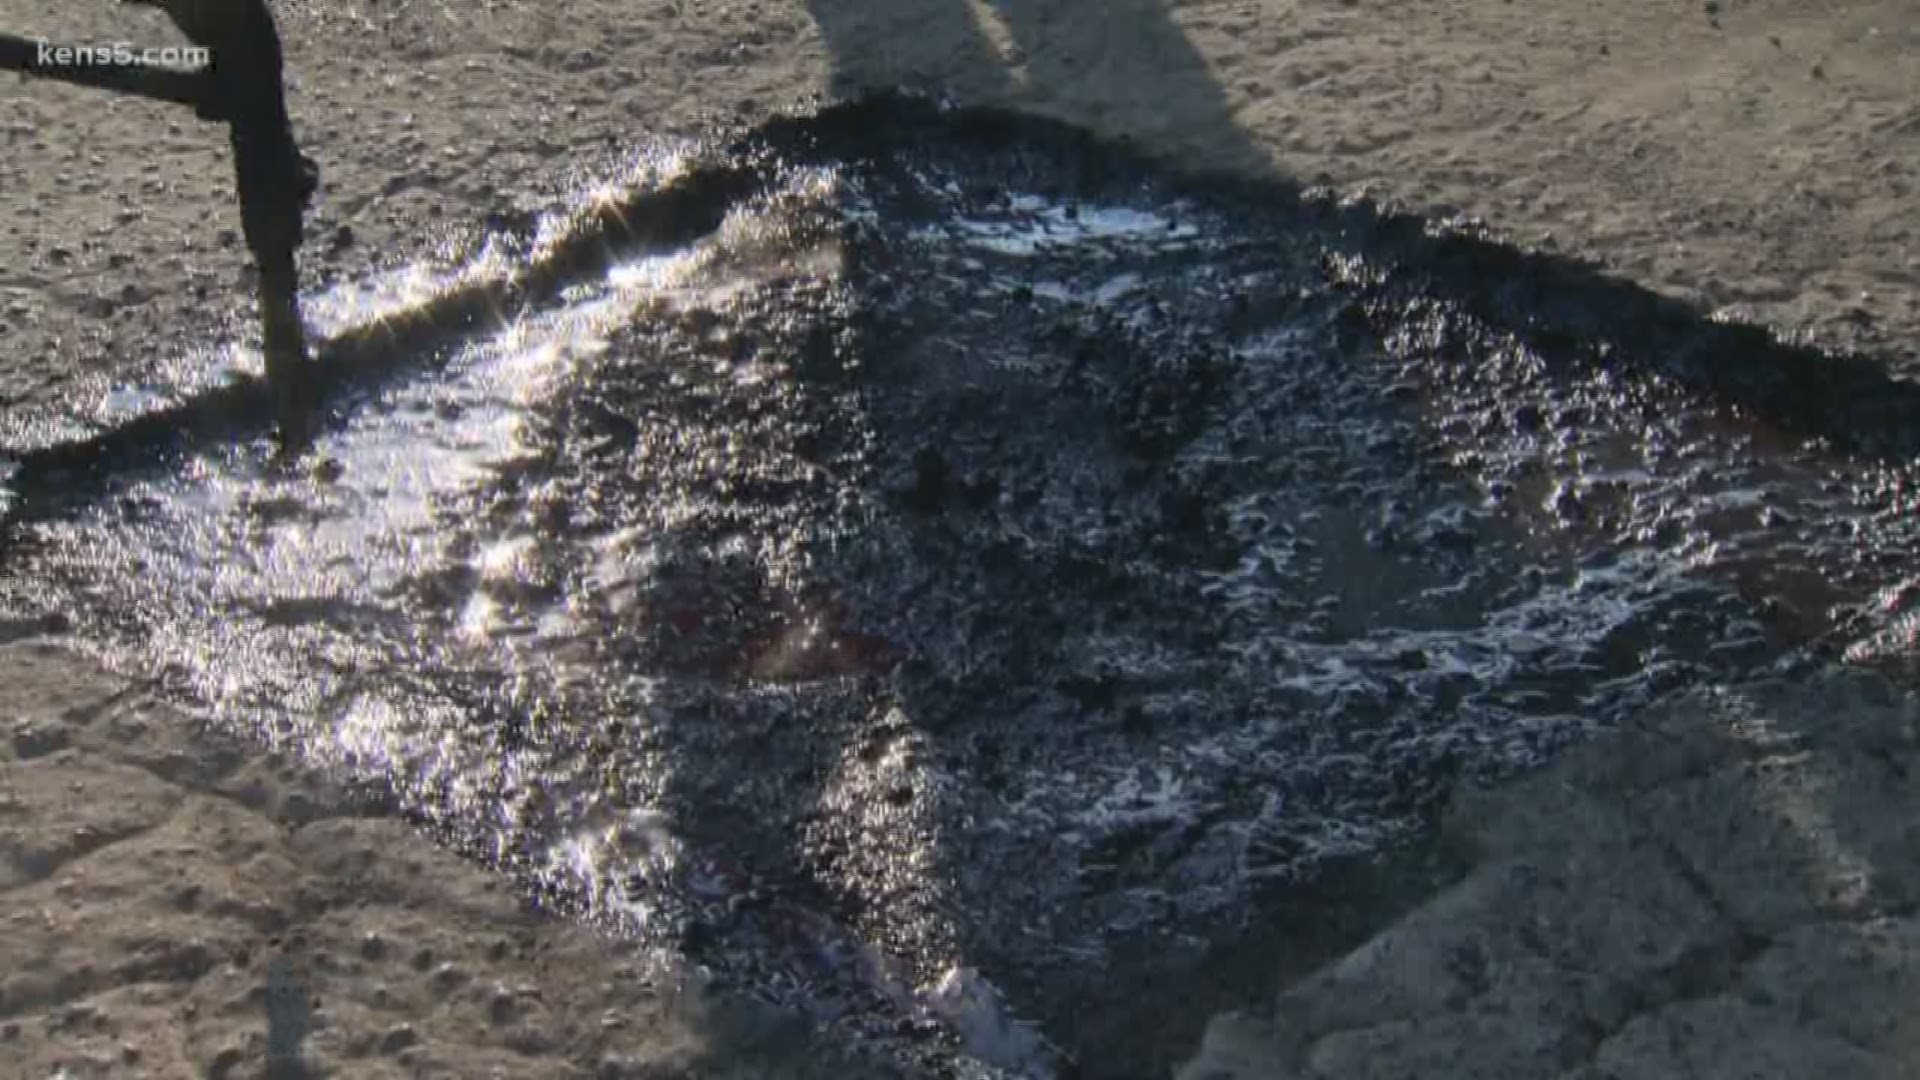 It can be a bumpy ride when driving down some streets of San Antonio. That's why KENS 5 is teaming up with the city of San Antonio to get those annoying potholes filled. Audrey Castoreno has more on how you can get help.